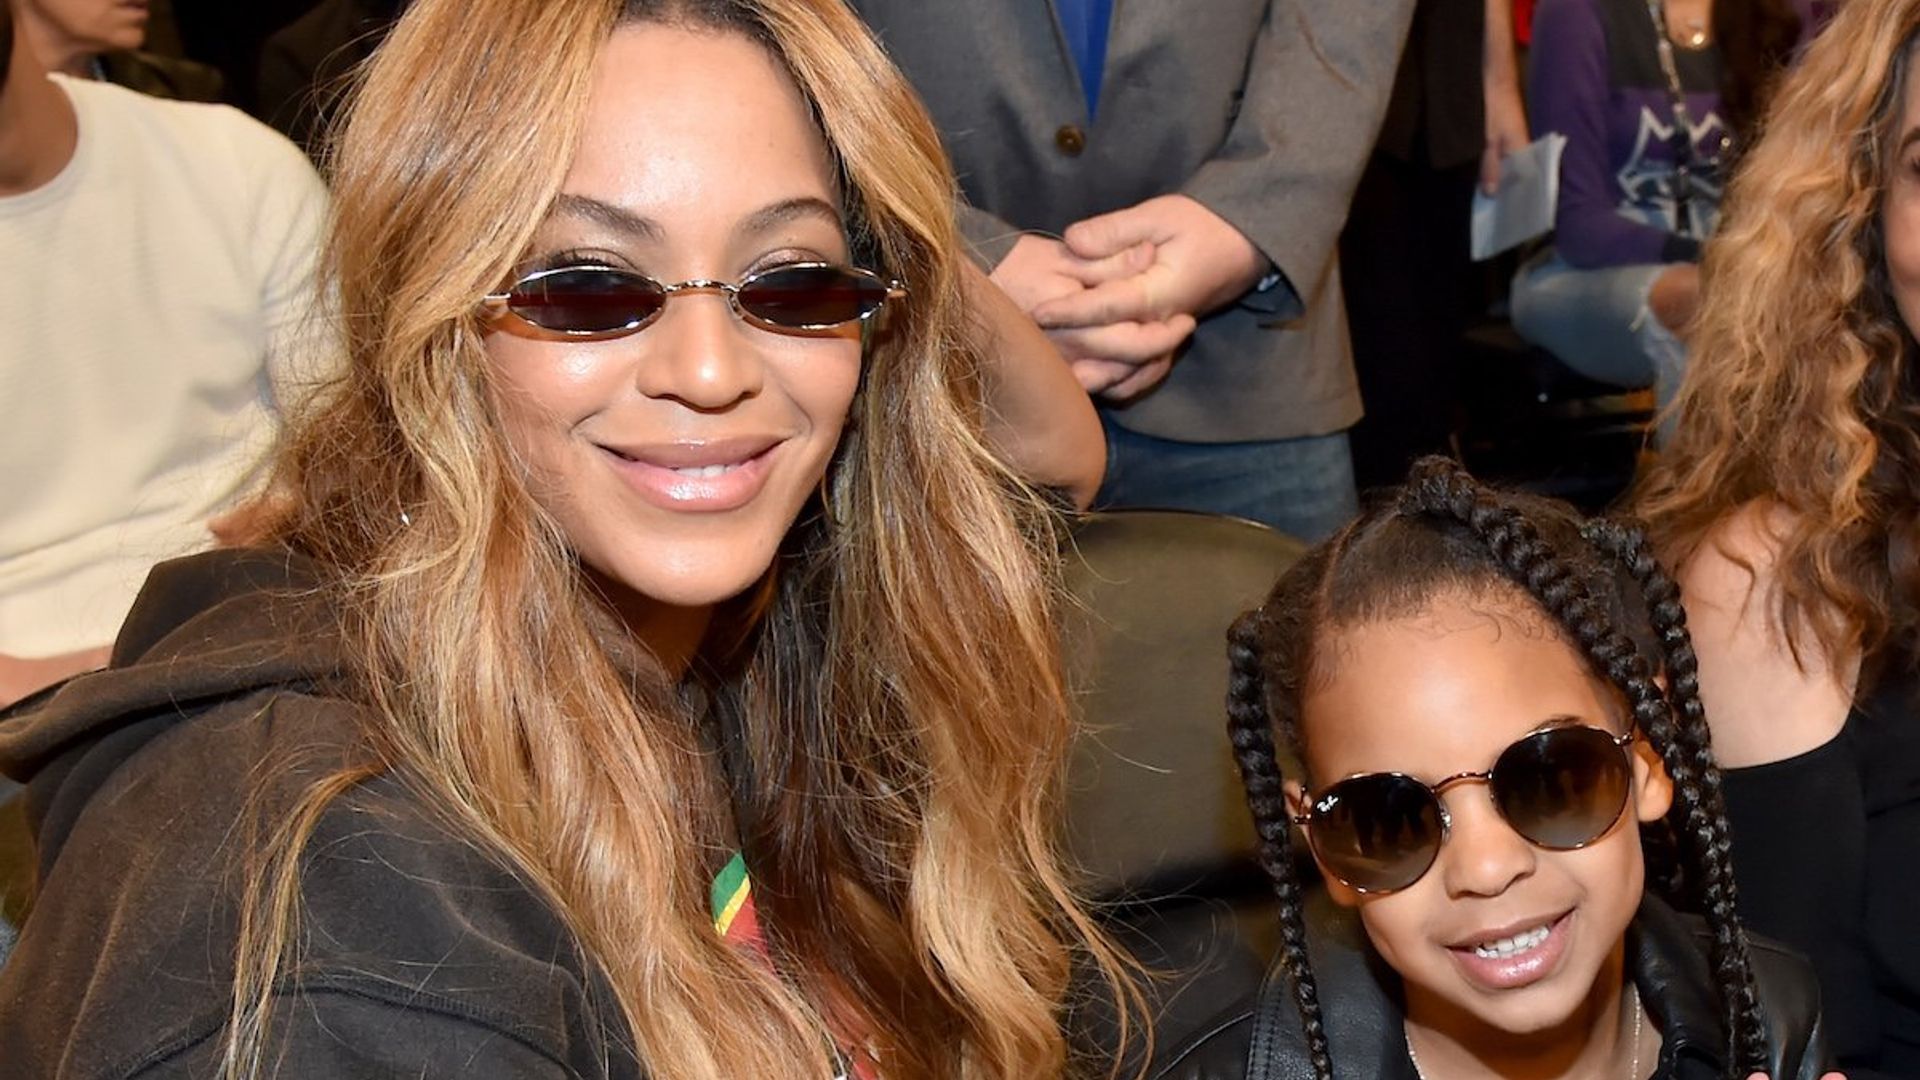 Beyonce's Daughter Blue Ivy's Hair Pulled by Fan During Concert - wide 11